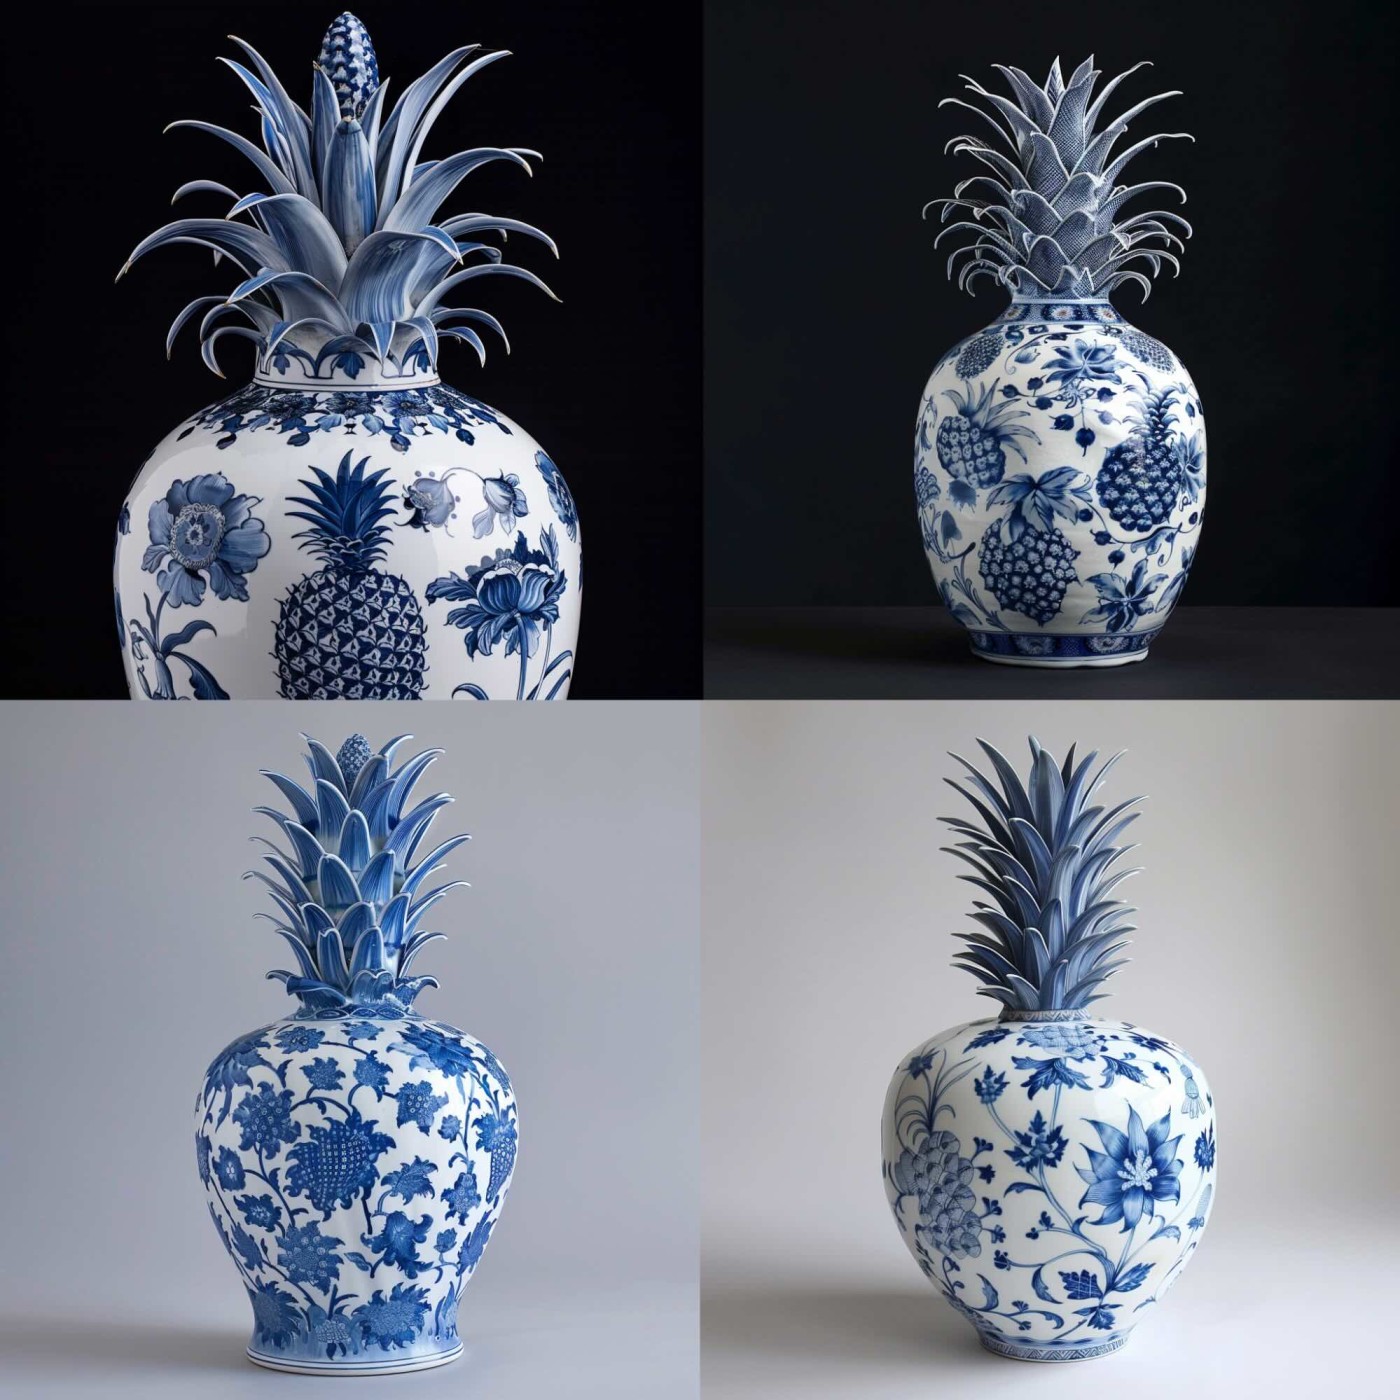 A pineapple, blue and white porcelain